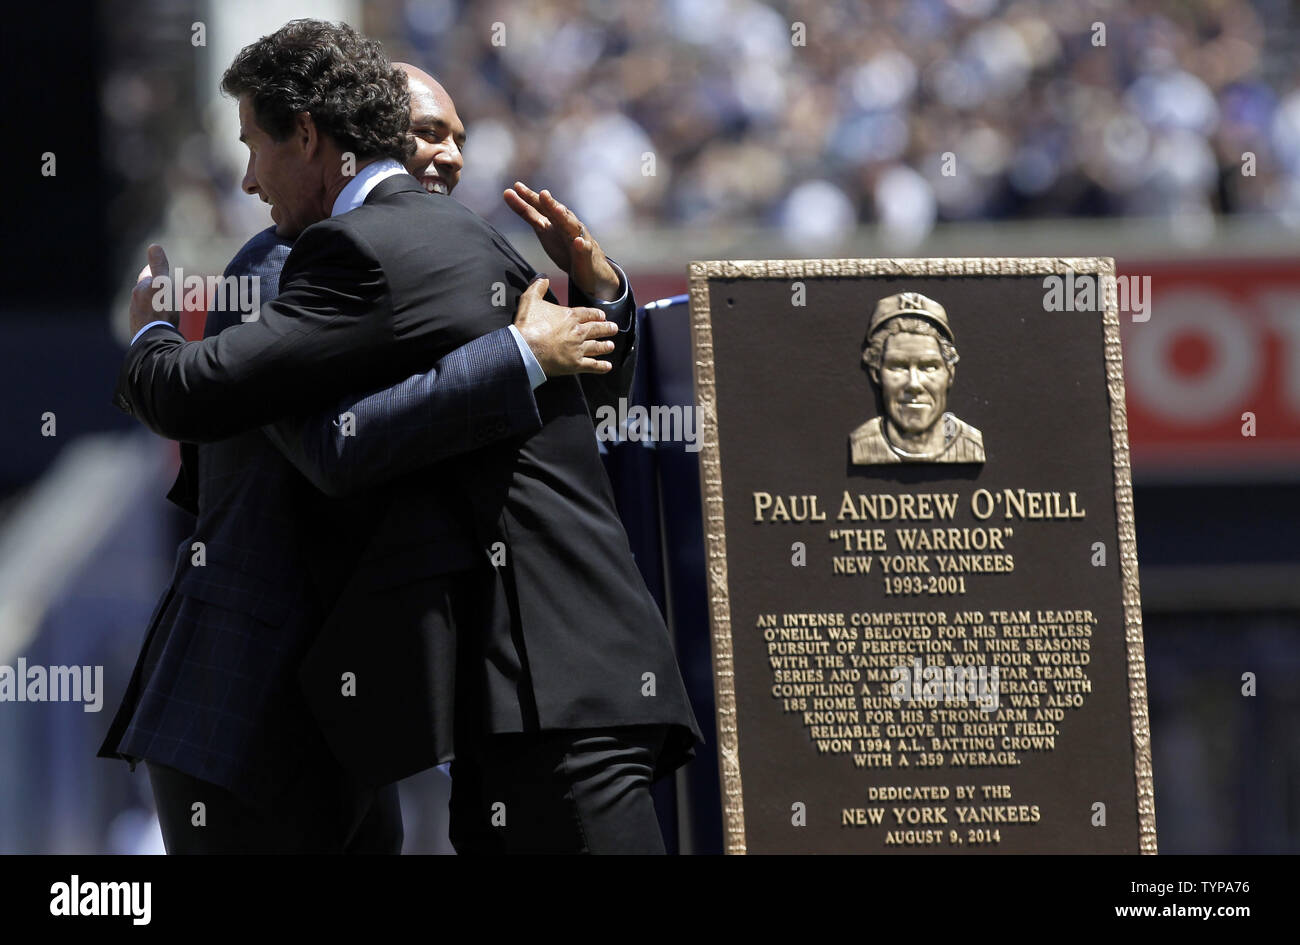 Retired New York Yankees players Mariano Rivera and Paul O'Neill hug on the field after a ceremony inducting O'Neill into Monument Park with a new plaque before the game against the Cleveland Indians at Yankee Stadium in New York City on August 9, 2014. Monument Park is an open-air museum located at the new Yankee Stadium containing a collection of monuments, plaques, and retired numbers honoring distinguished members of the New York Yankees.    UPI/John Angelillo Stock Photo